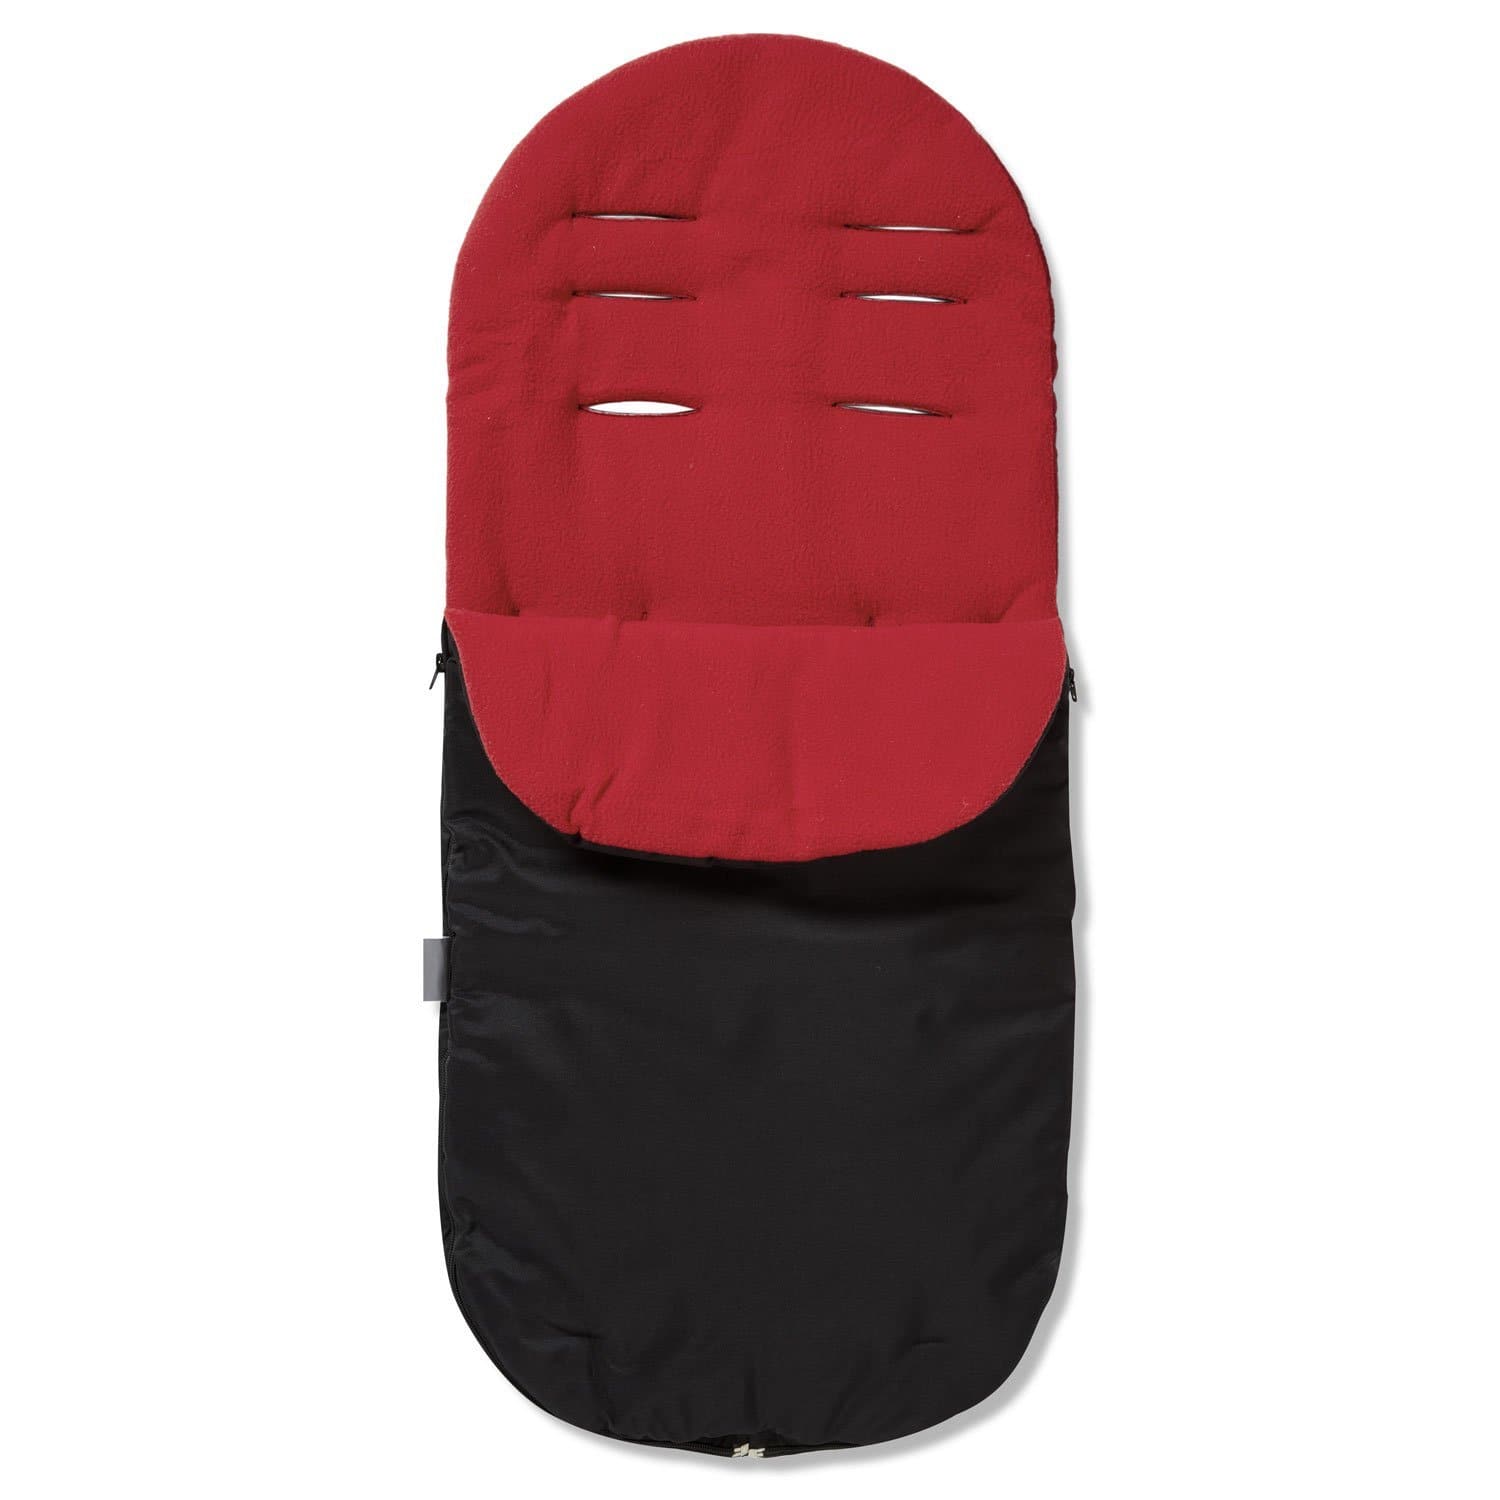 Footmuff / Cosy Toes Compatible with Petite - Red / Fits All Models | For Your Little One